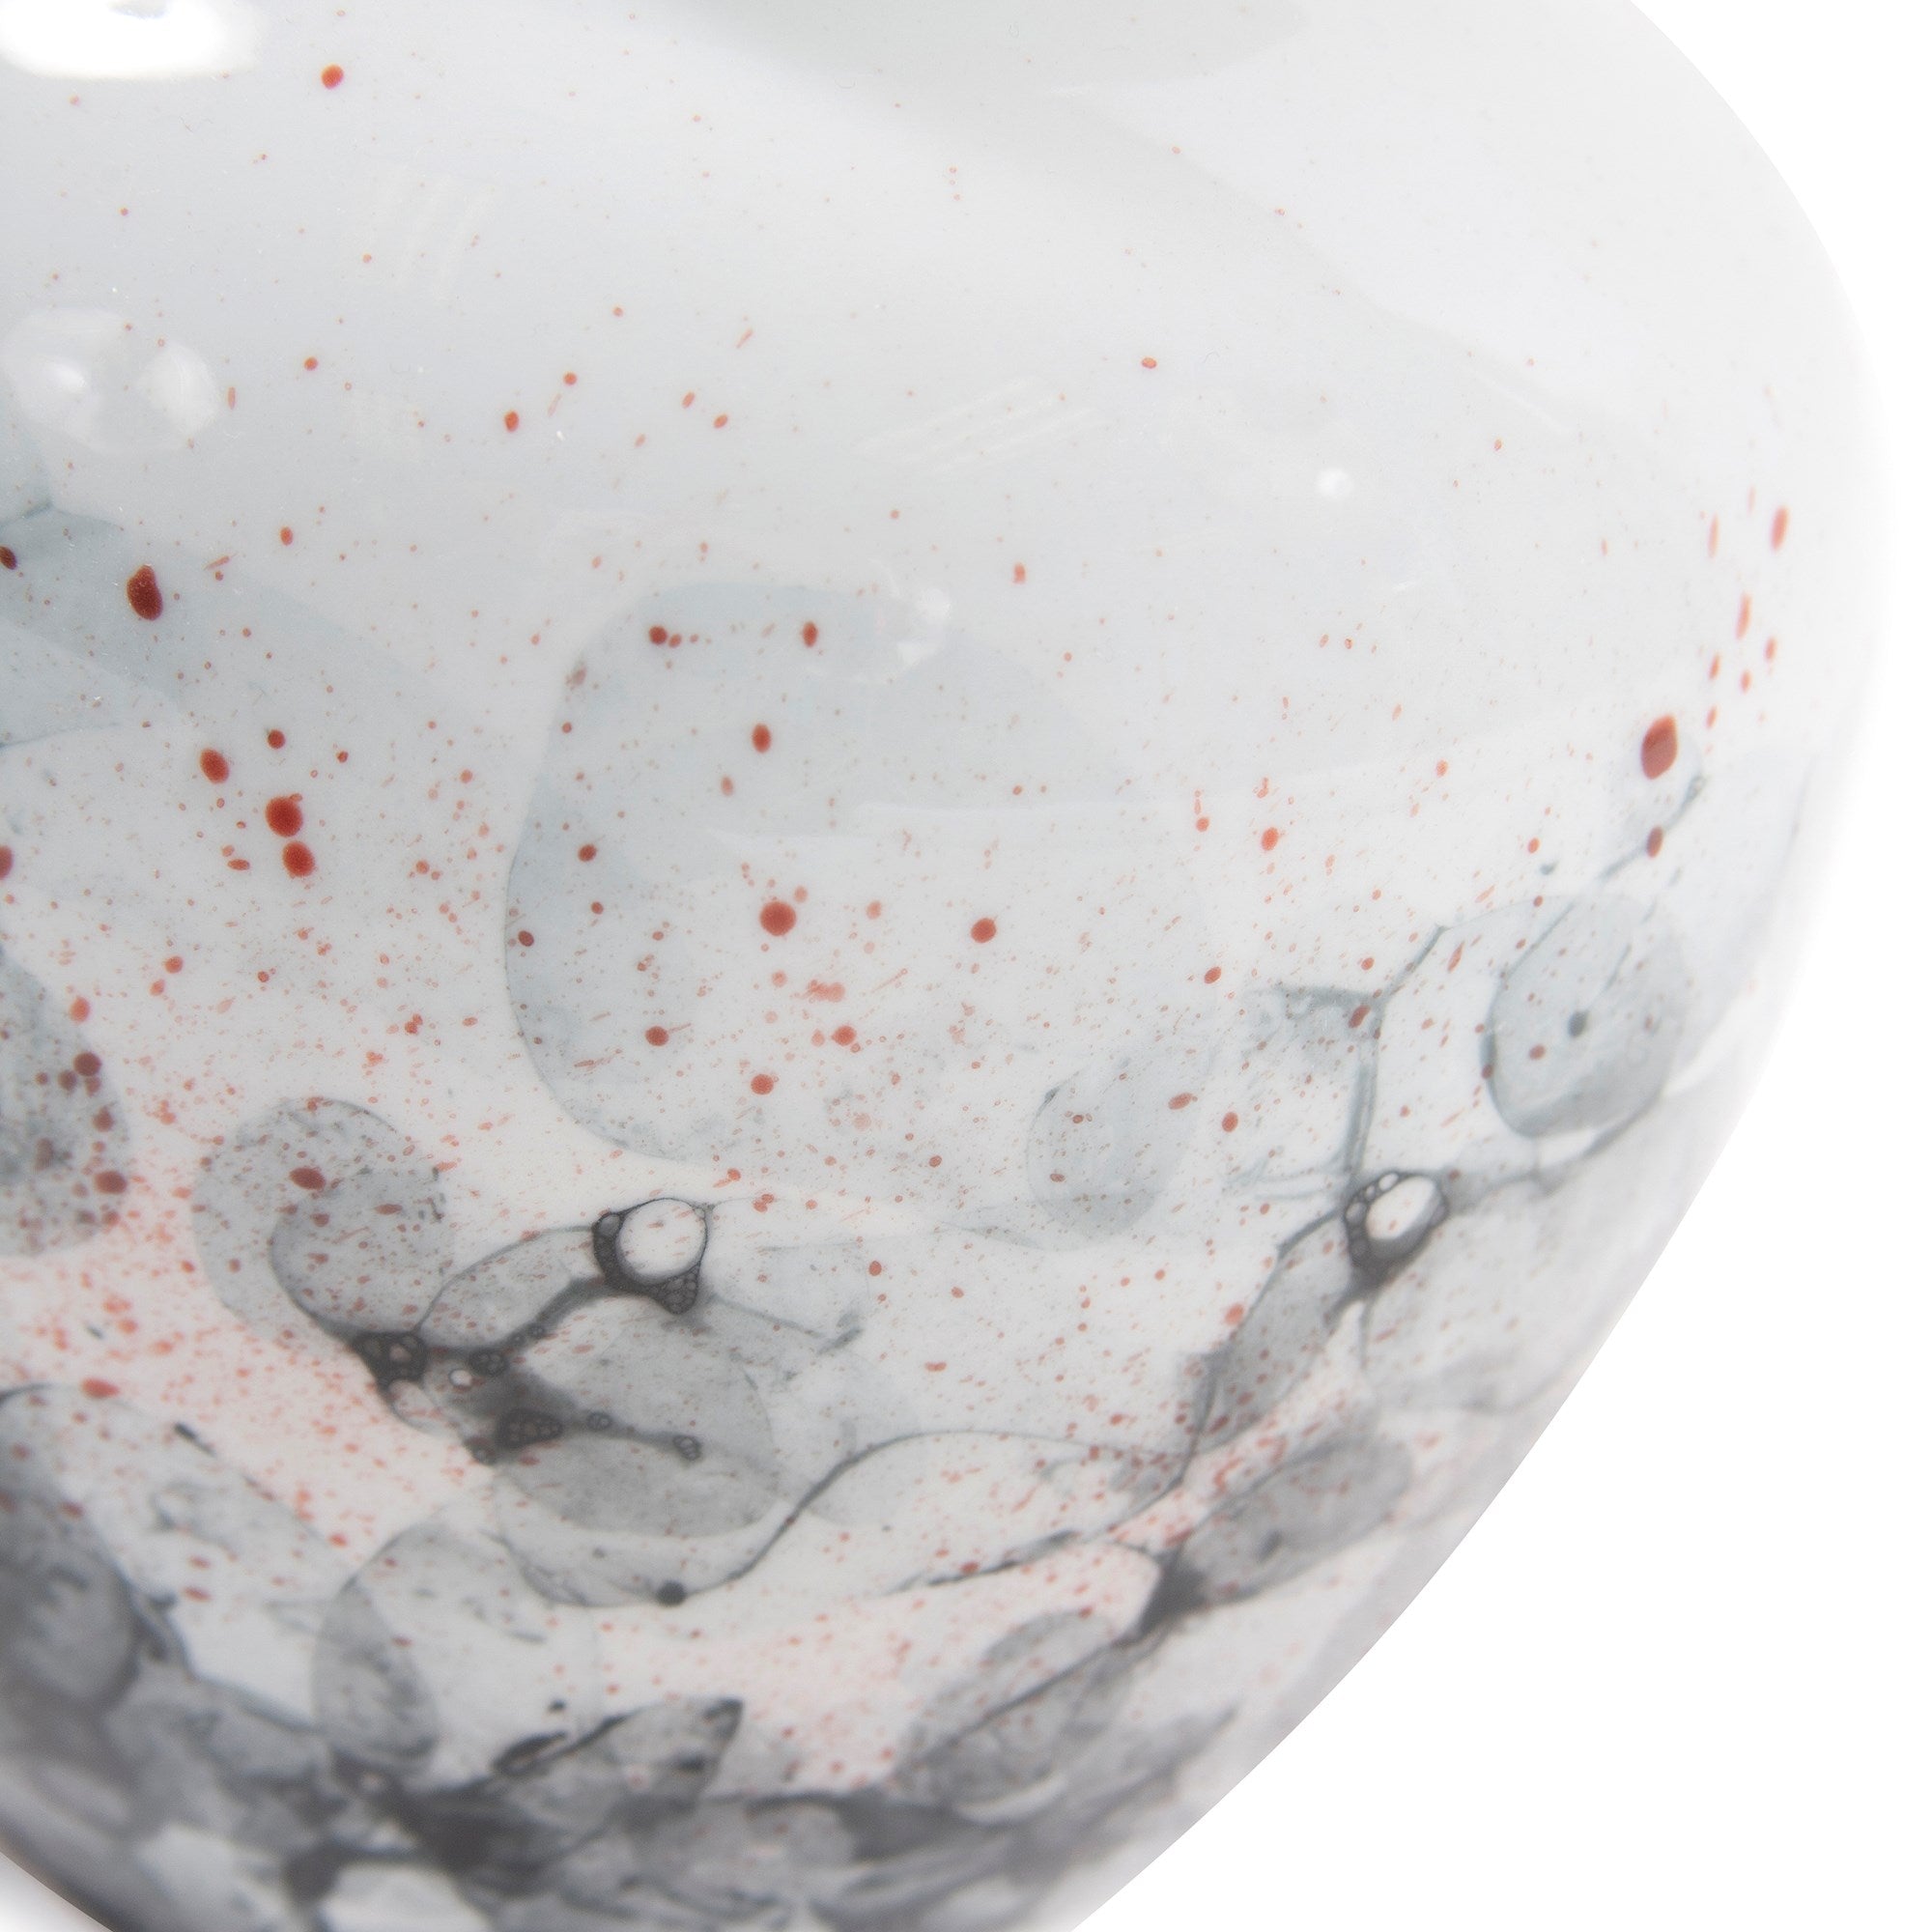 Gray and White Soap Bubble Porcelain Vase, Small